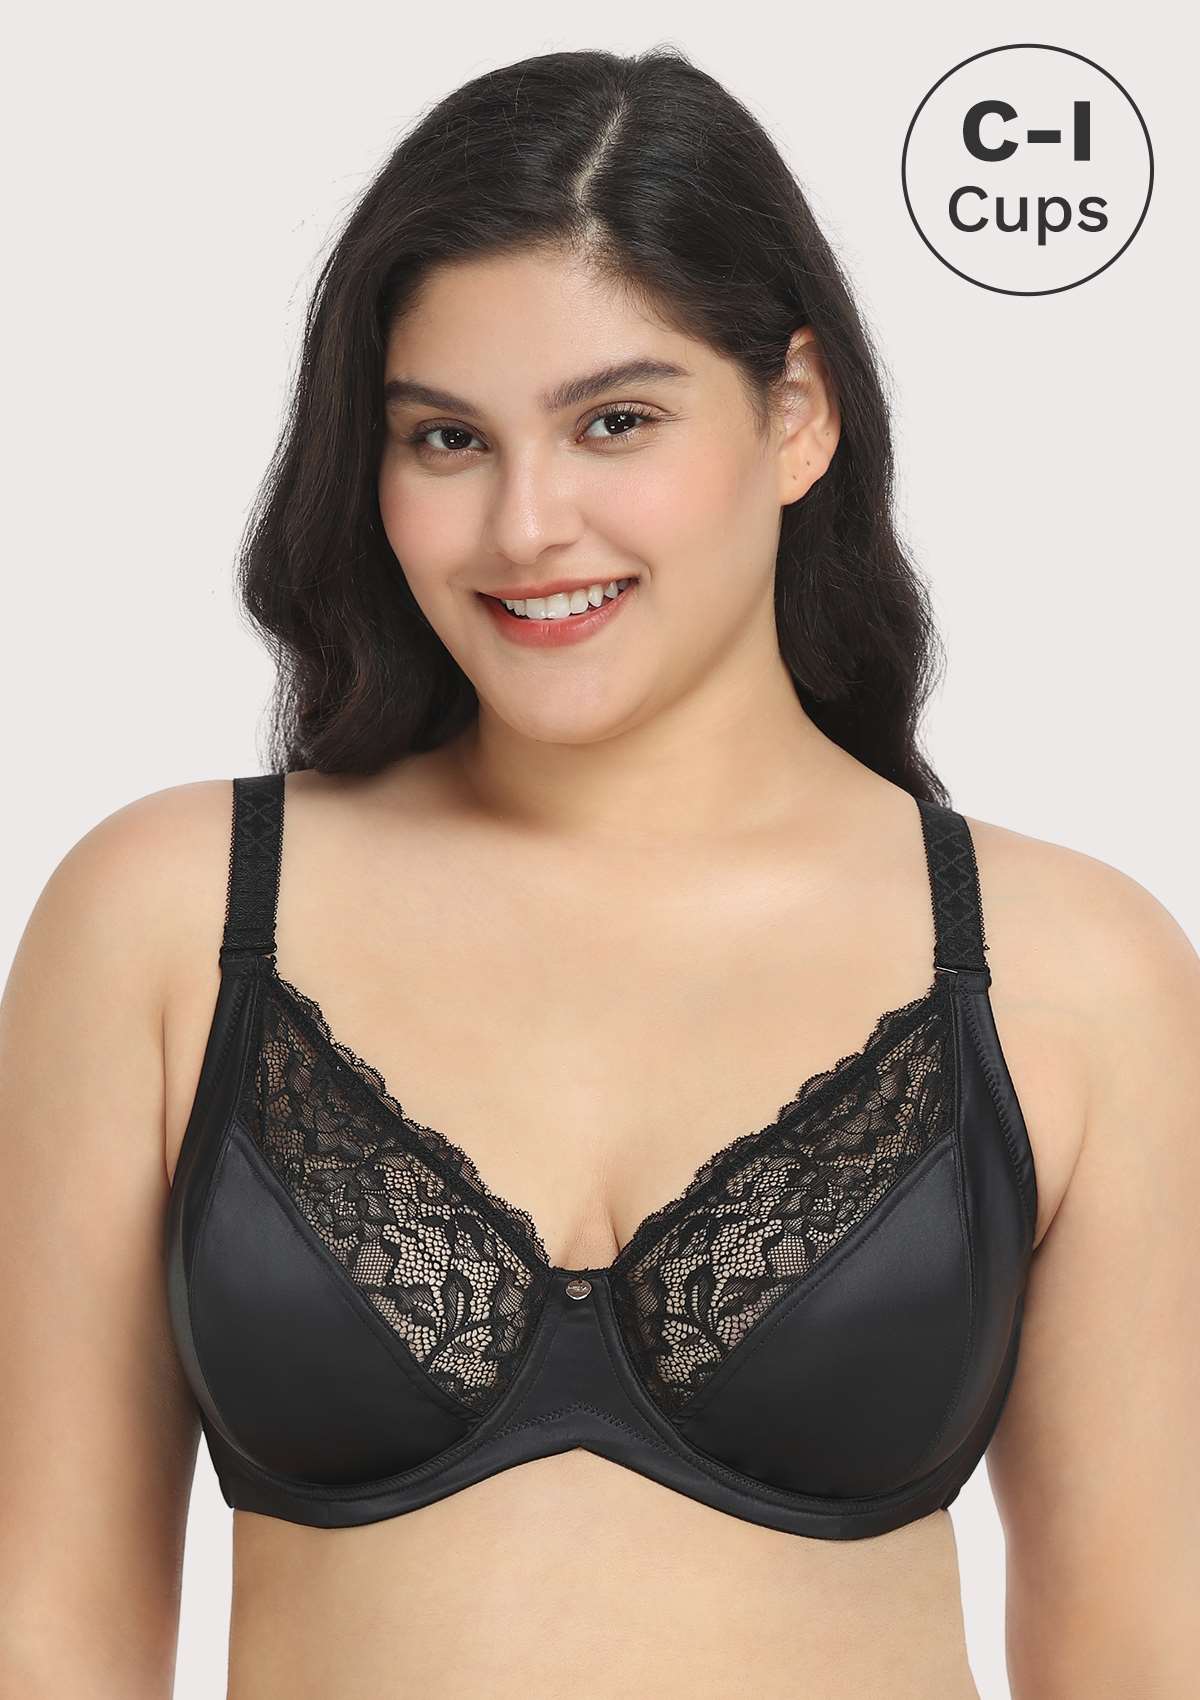 HSIA Foxy Satin Silky Full Coverage Underwire Bra With Floral Lace Trim - Black / 38 / G